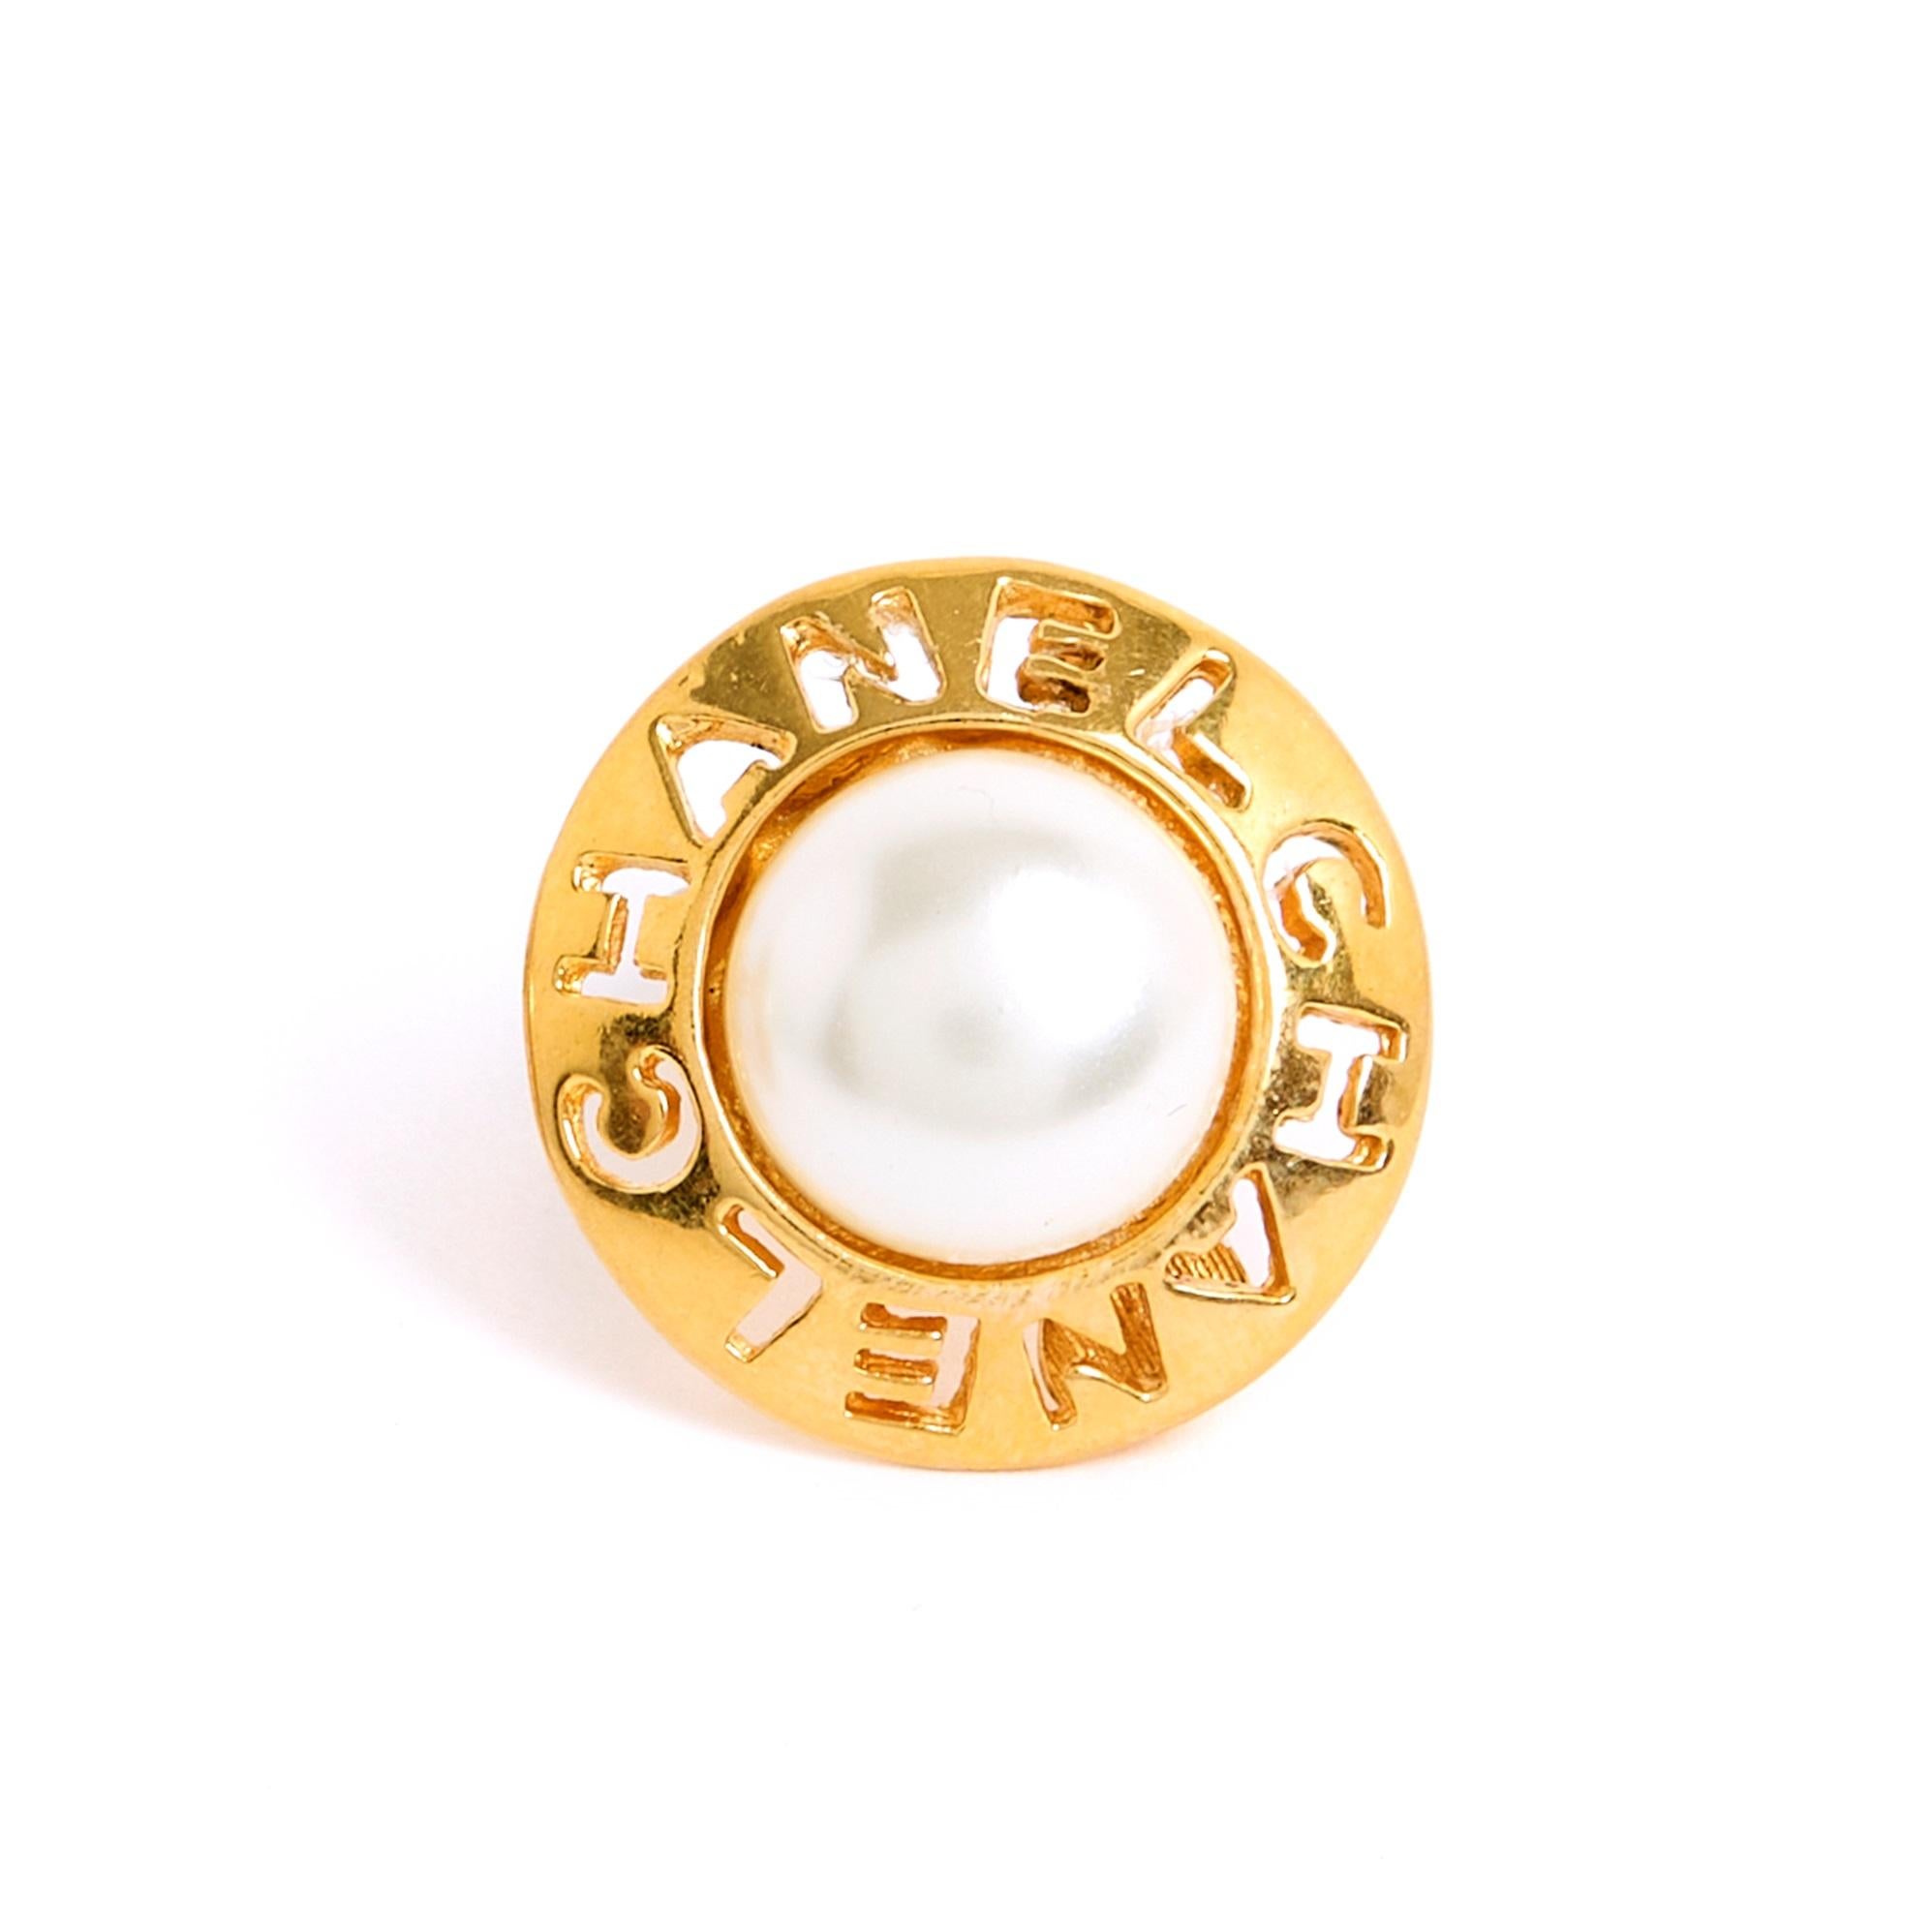 Chanel earrings, gold metal clips with openwork letters CHANEL, half ecru-colored fancy pearl in the center, circa 1990. Diameter 2.5 cm. The earrings show slight traces of their age but they remain in very good condition, collector's item and